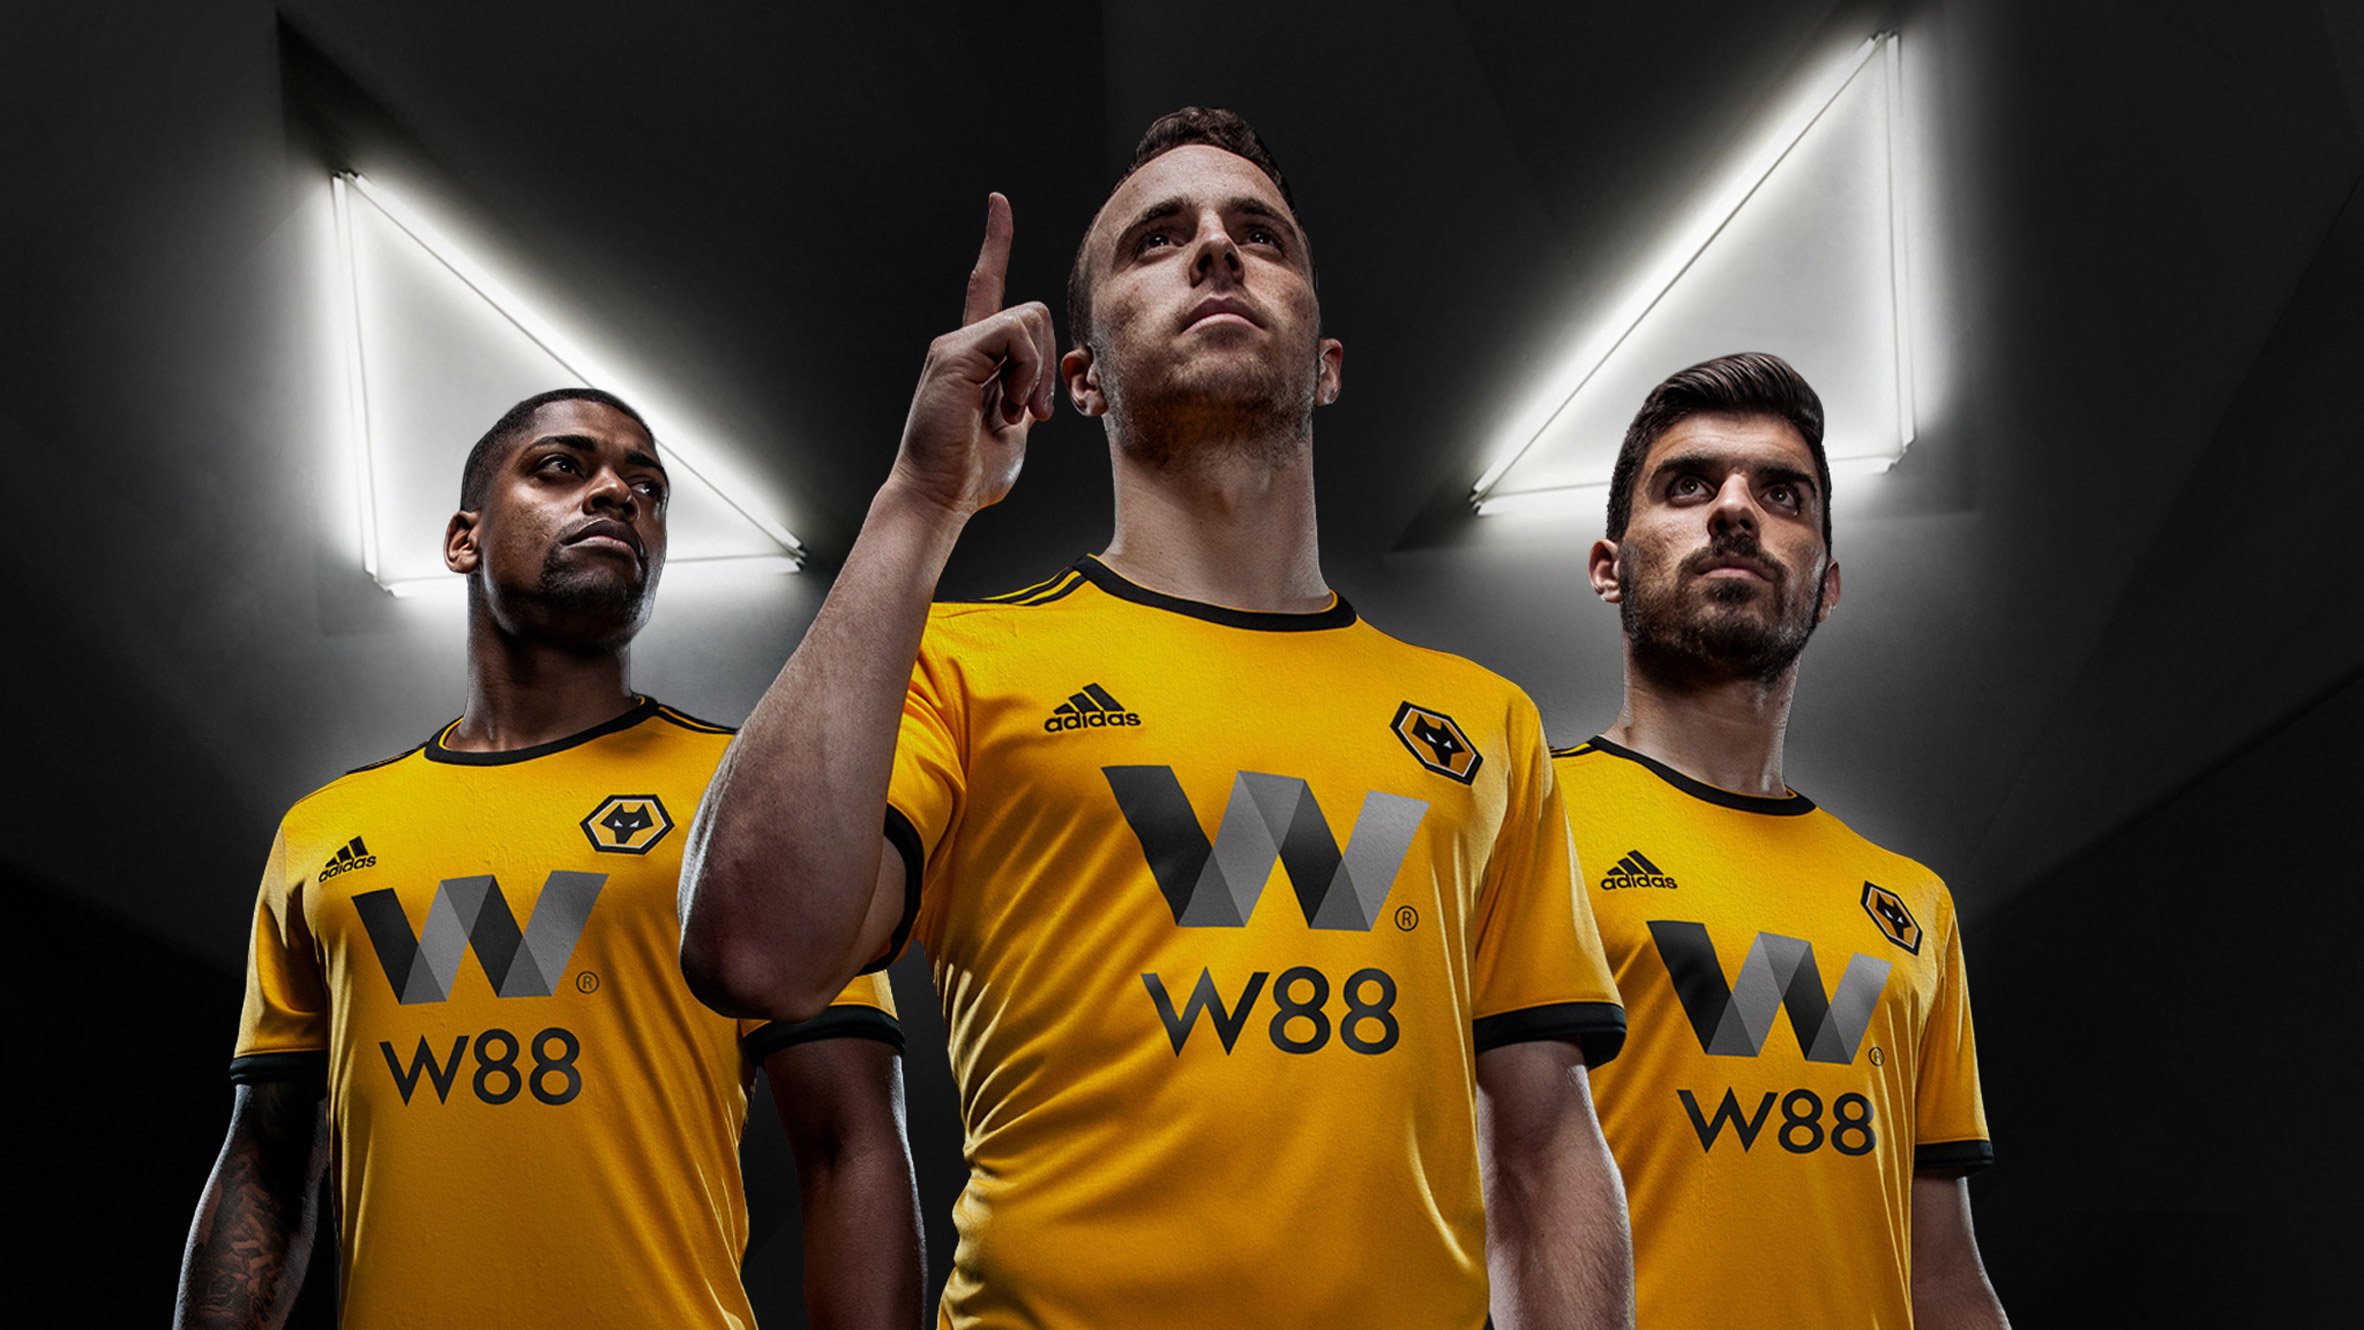 Who Is Wolverhampton Wanderers Manager